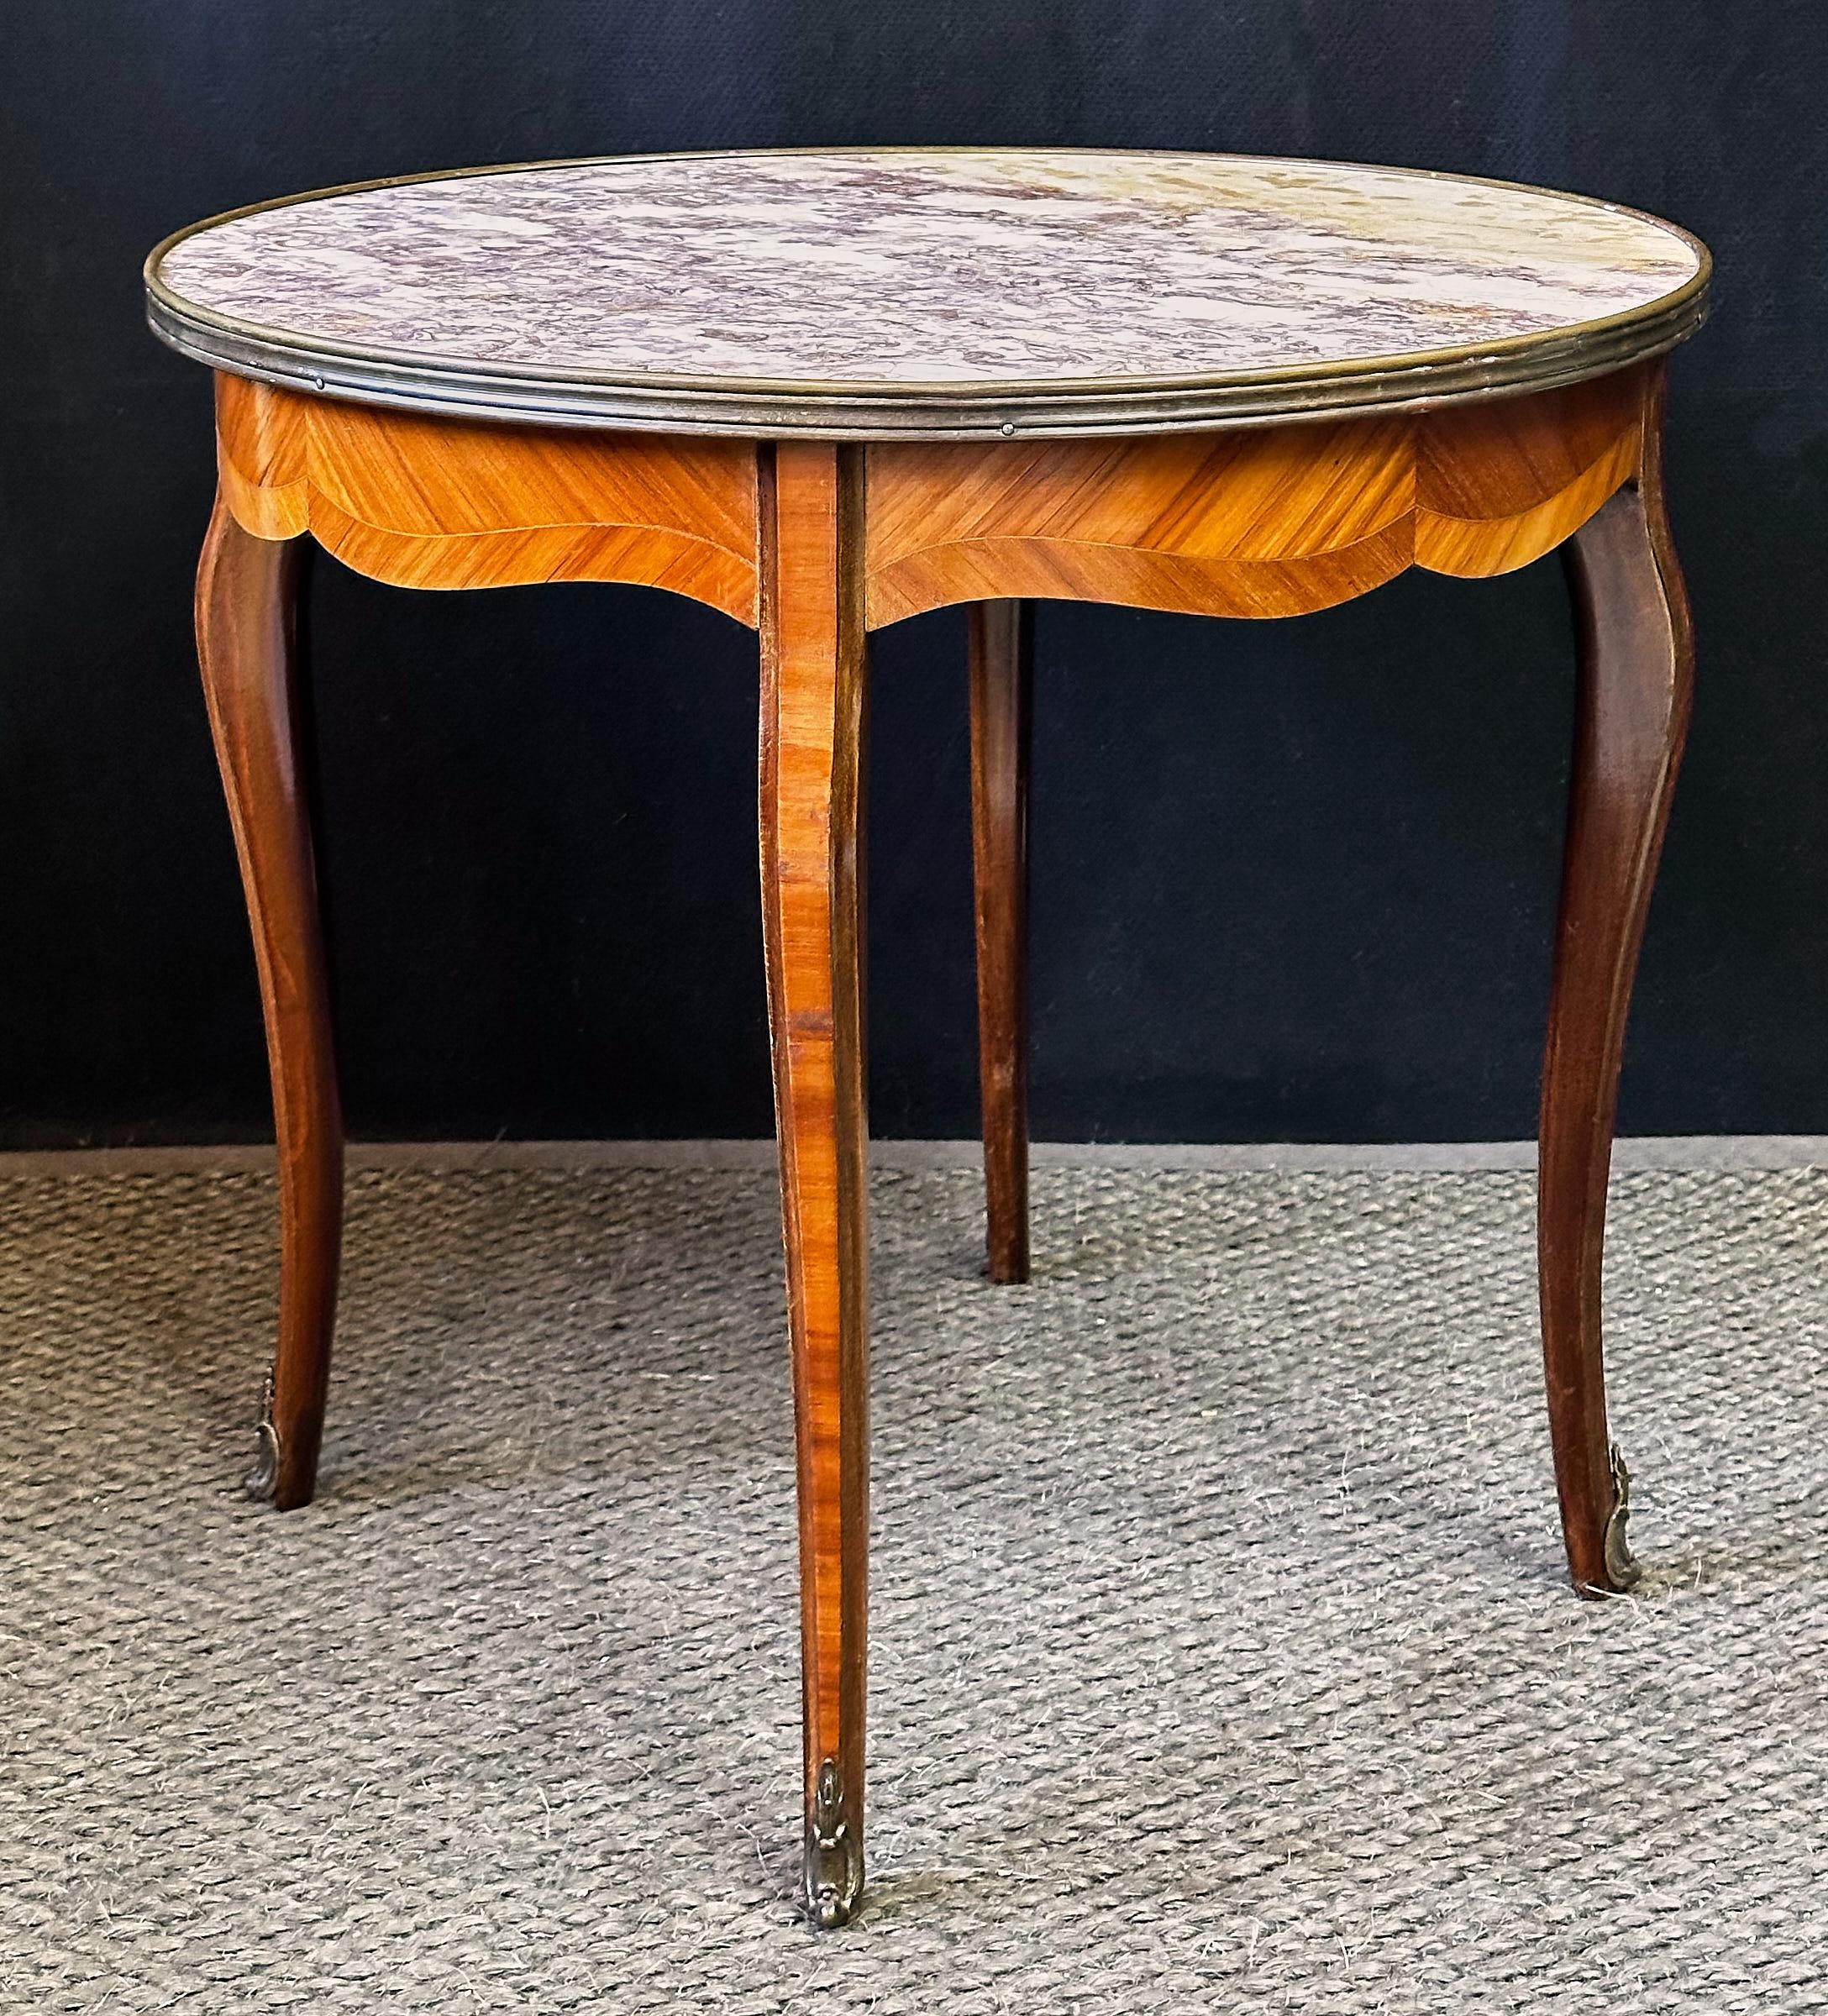 Hollywood Regency Italian Marble Top Side Table, Circa 1940s For Sale